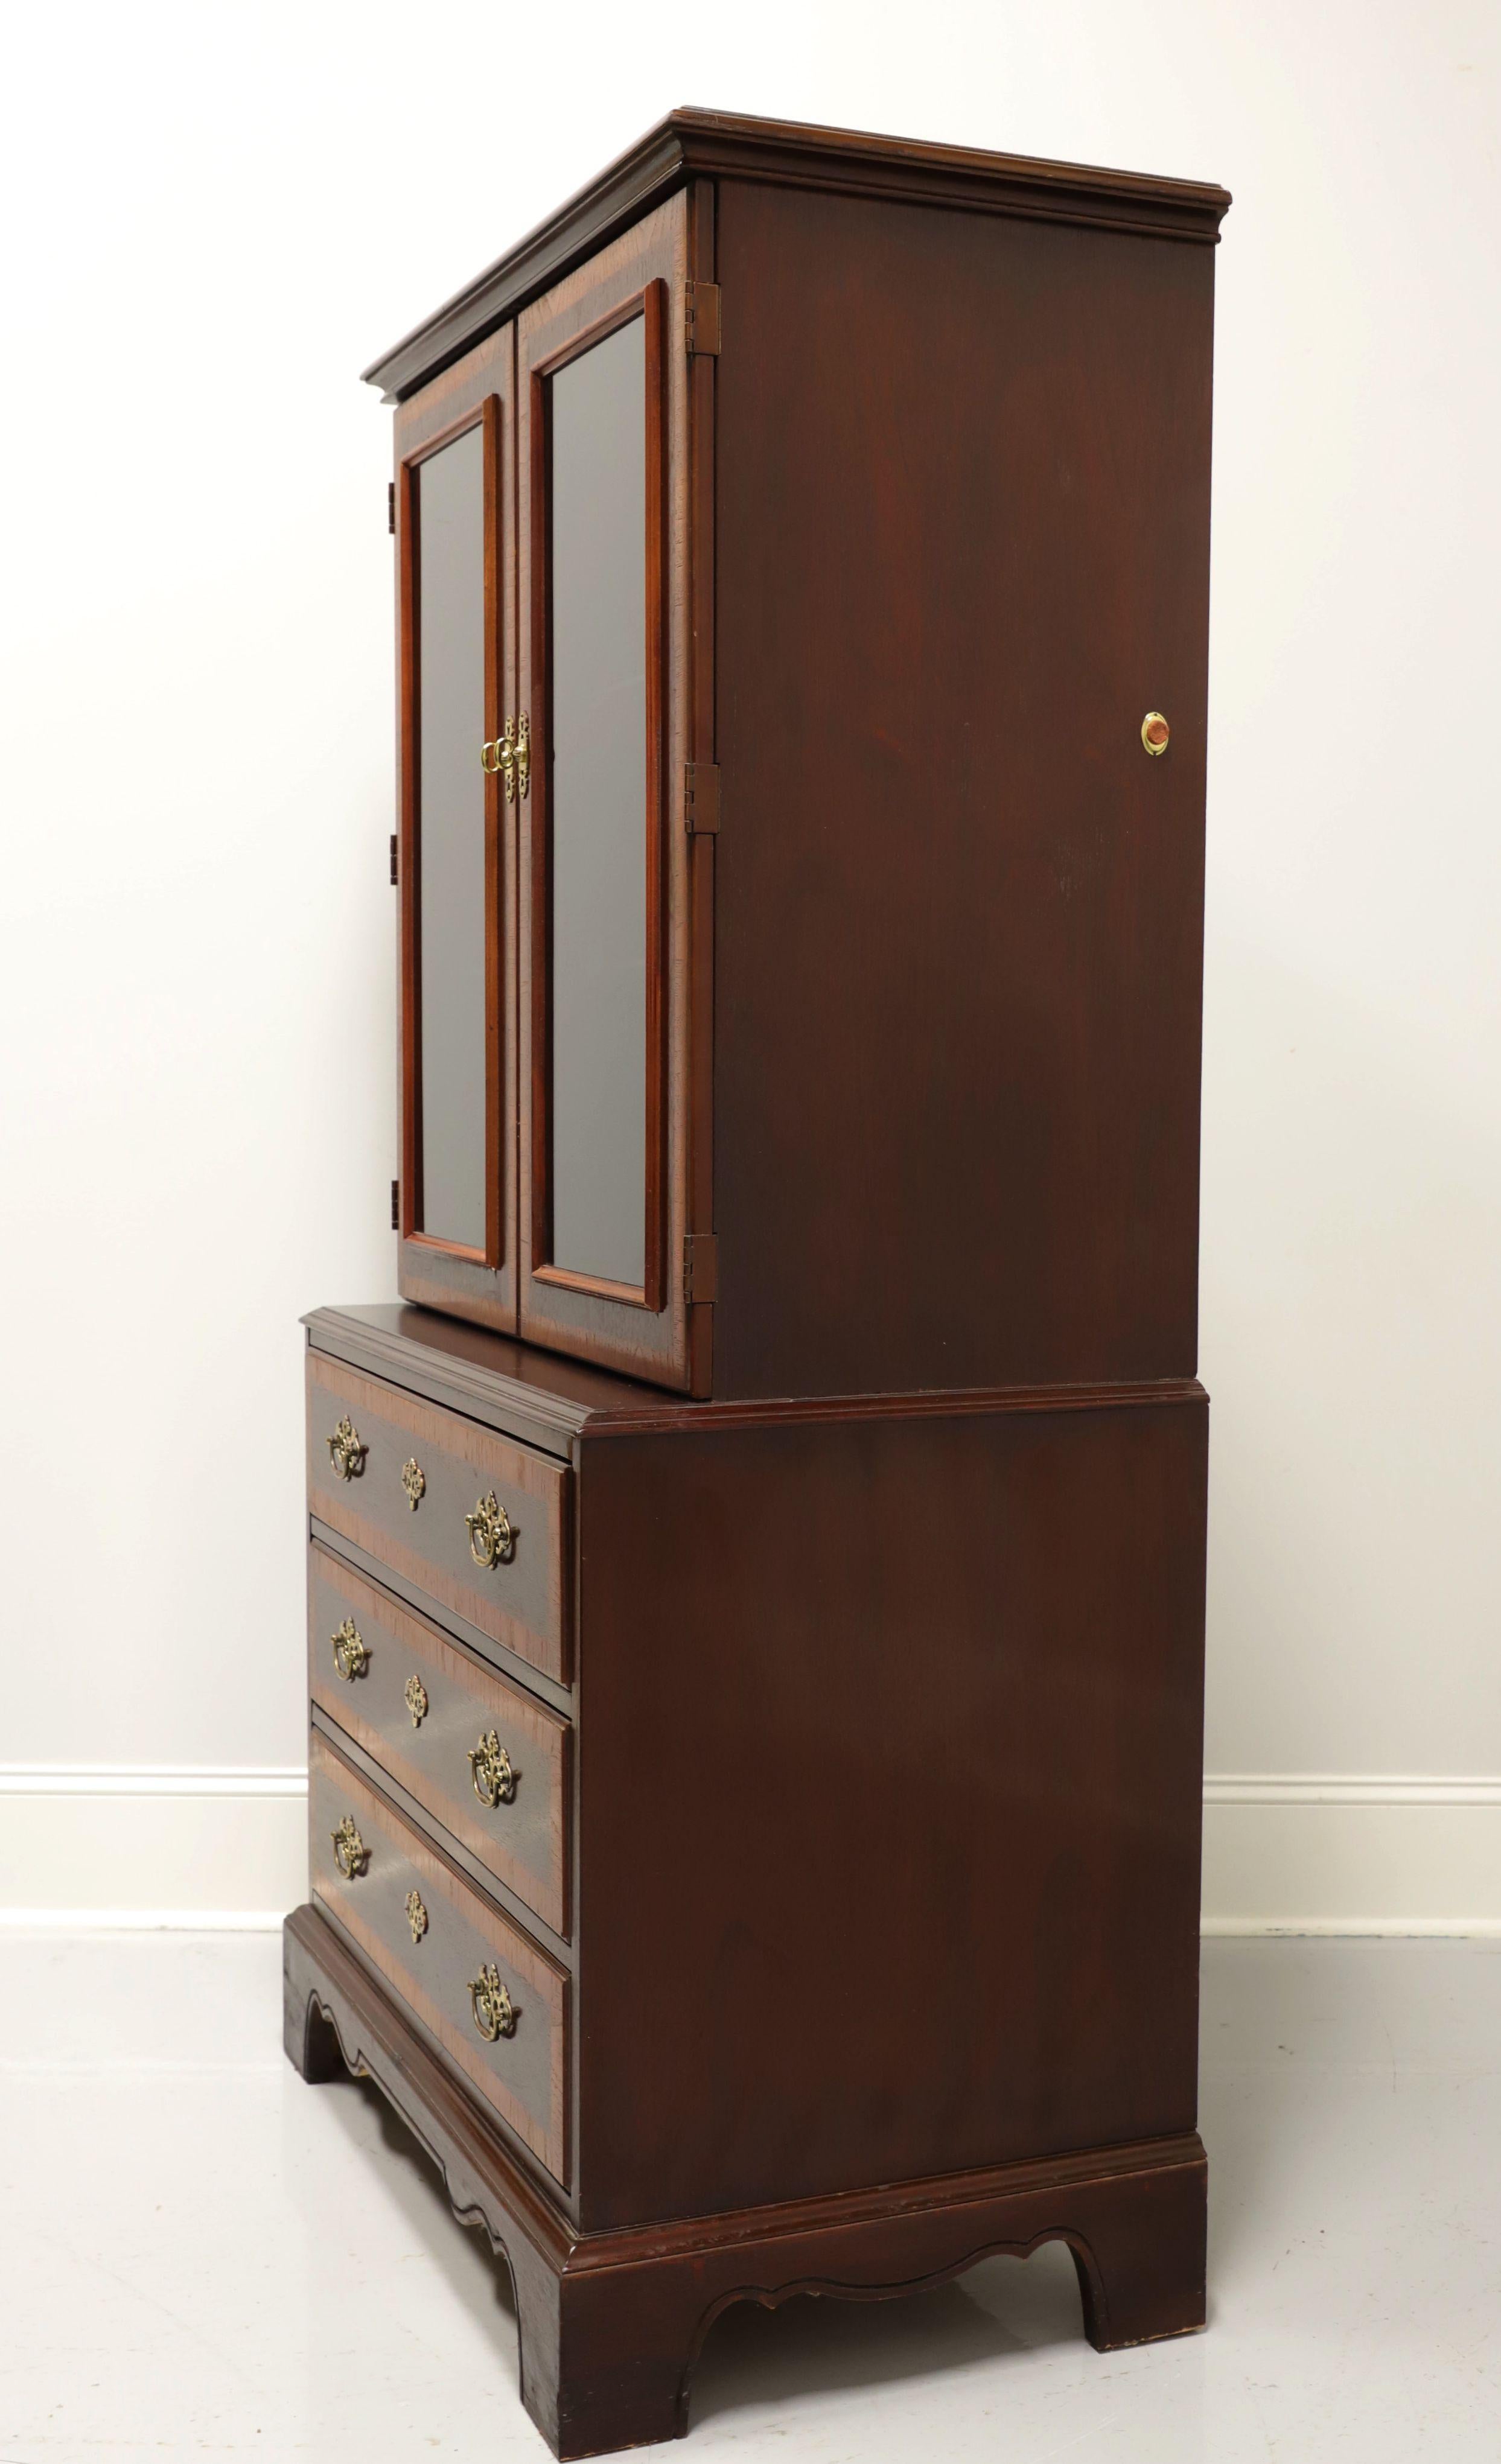 Chippendale DREXEL 18th Century Collection Banded Mahogany Curio / Display Cabinet - A